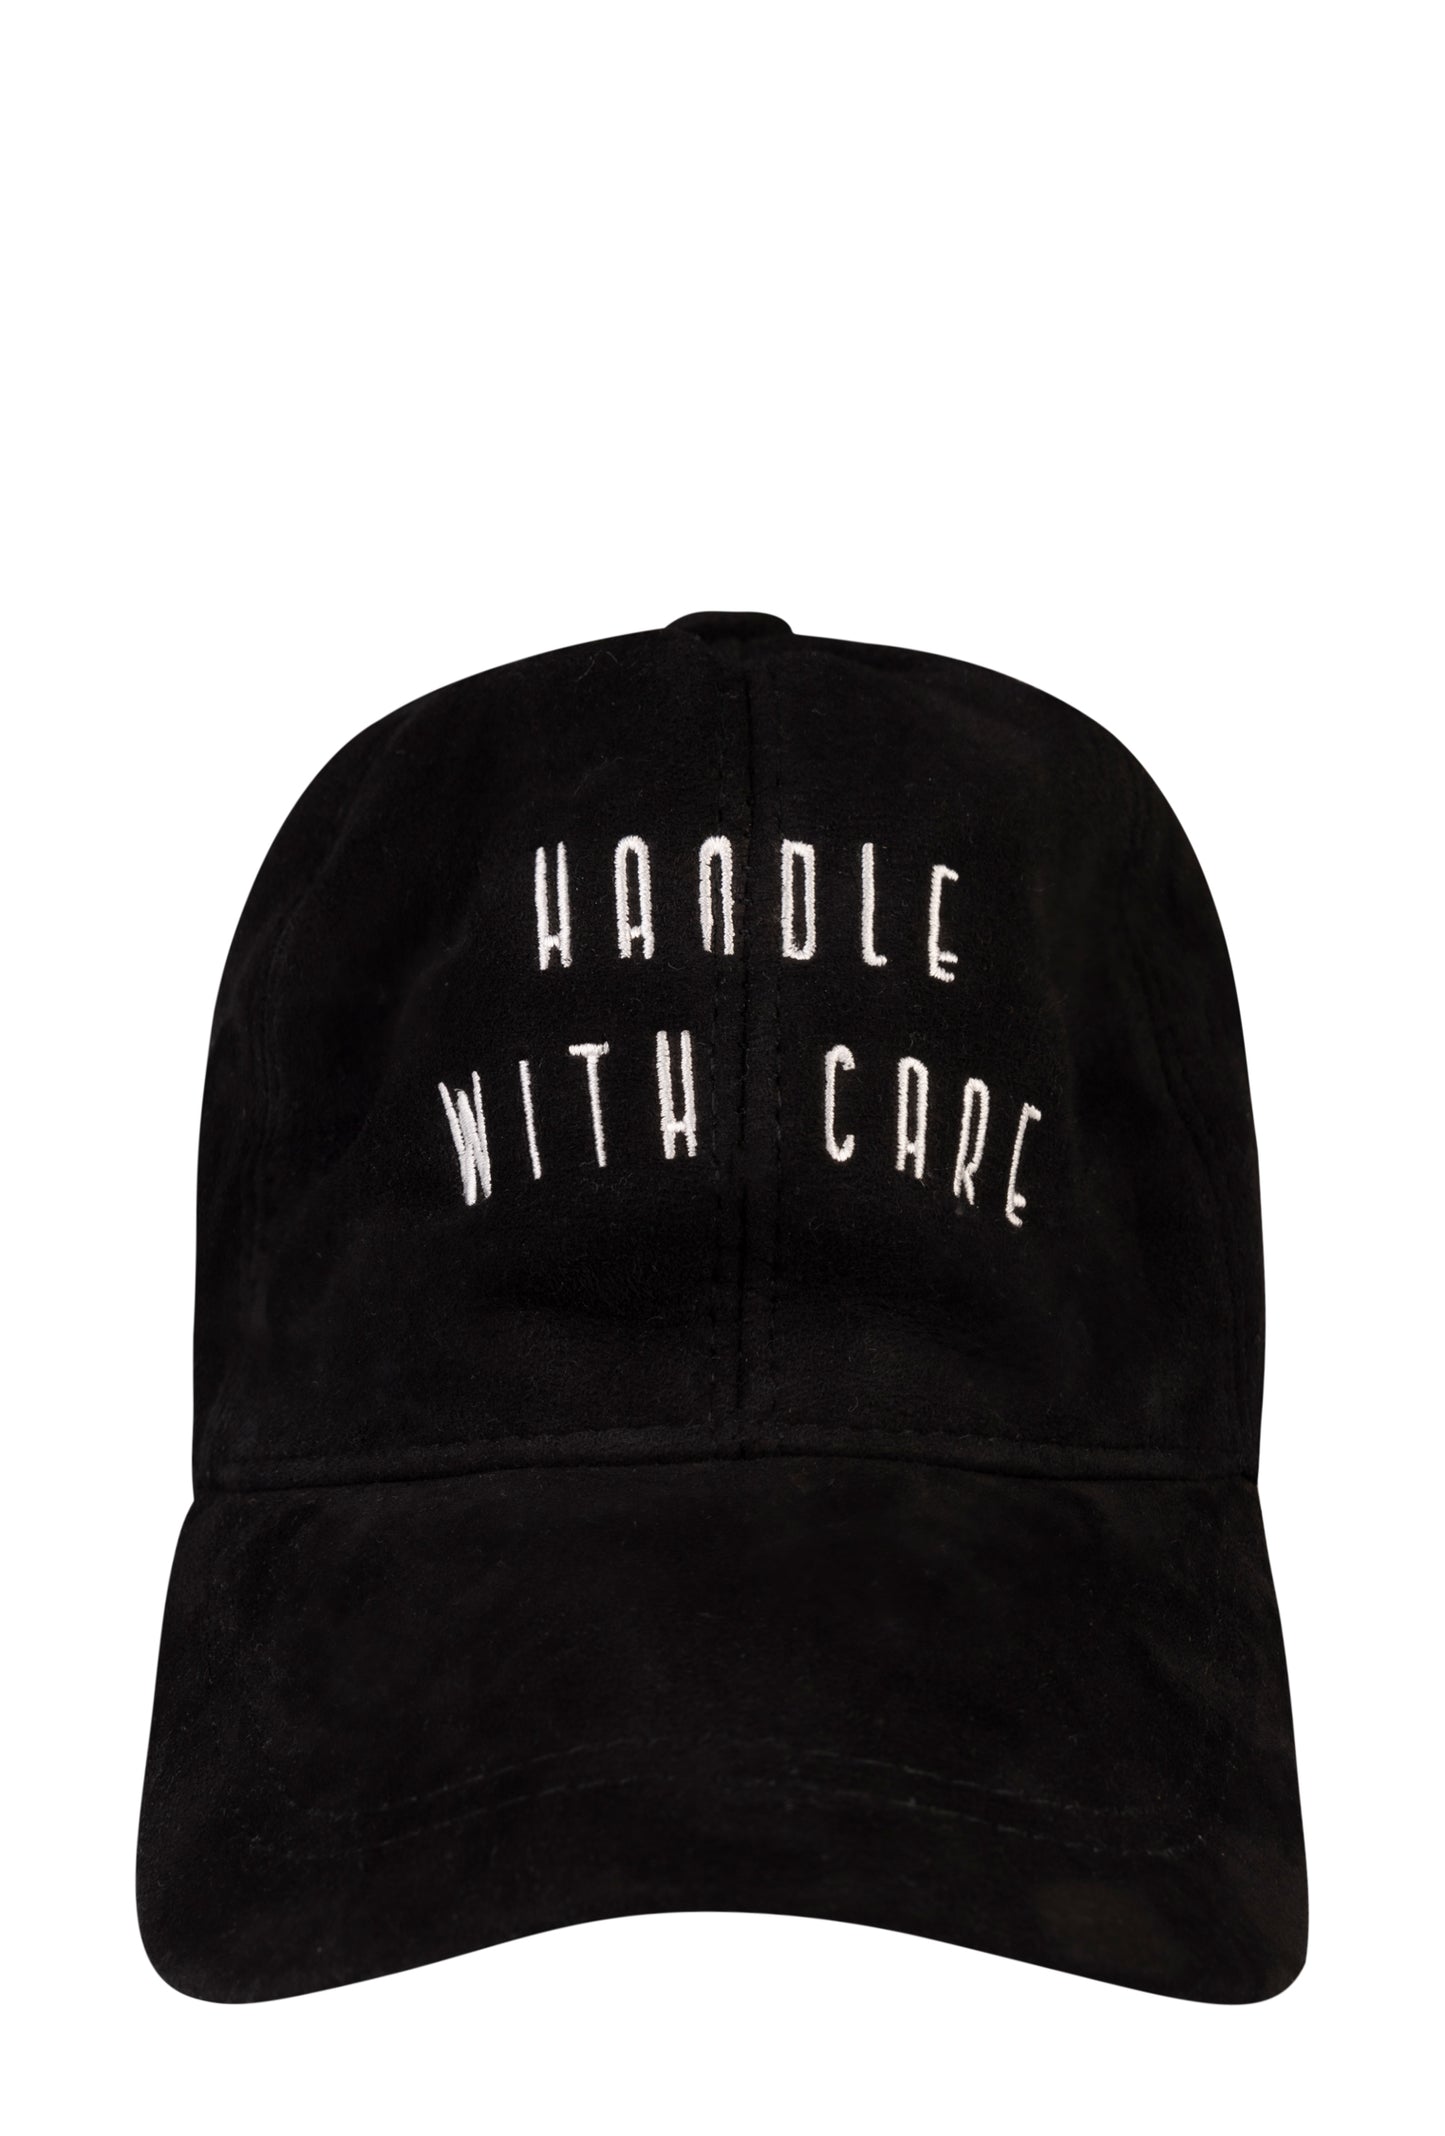 Handle With Care - Black